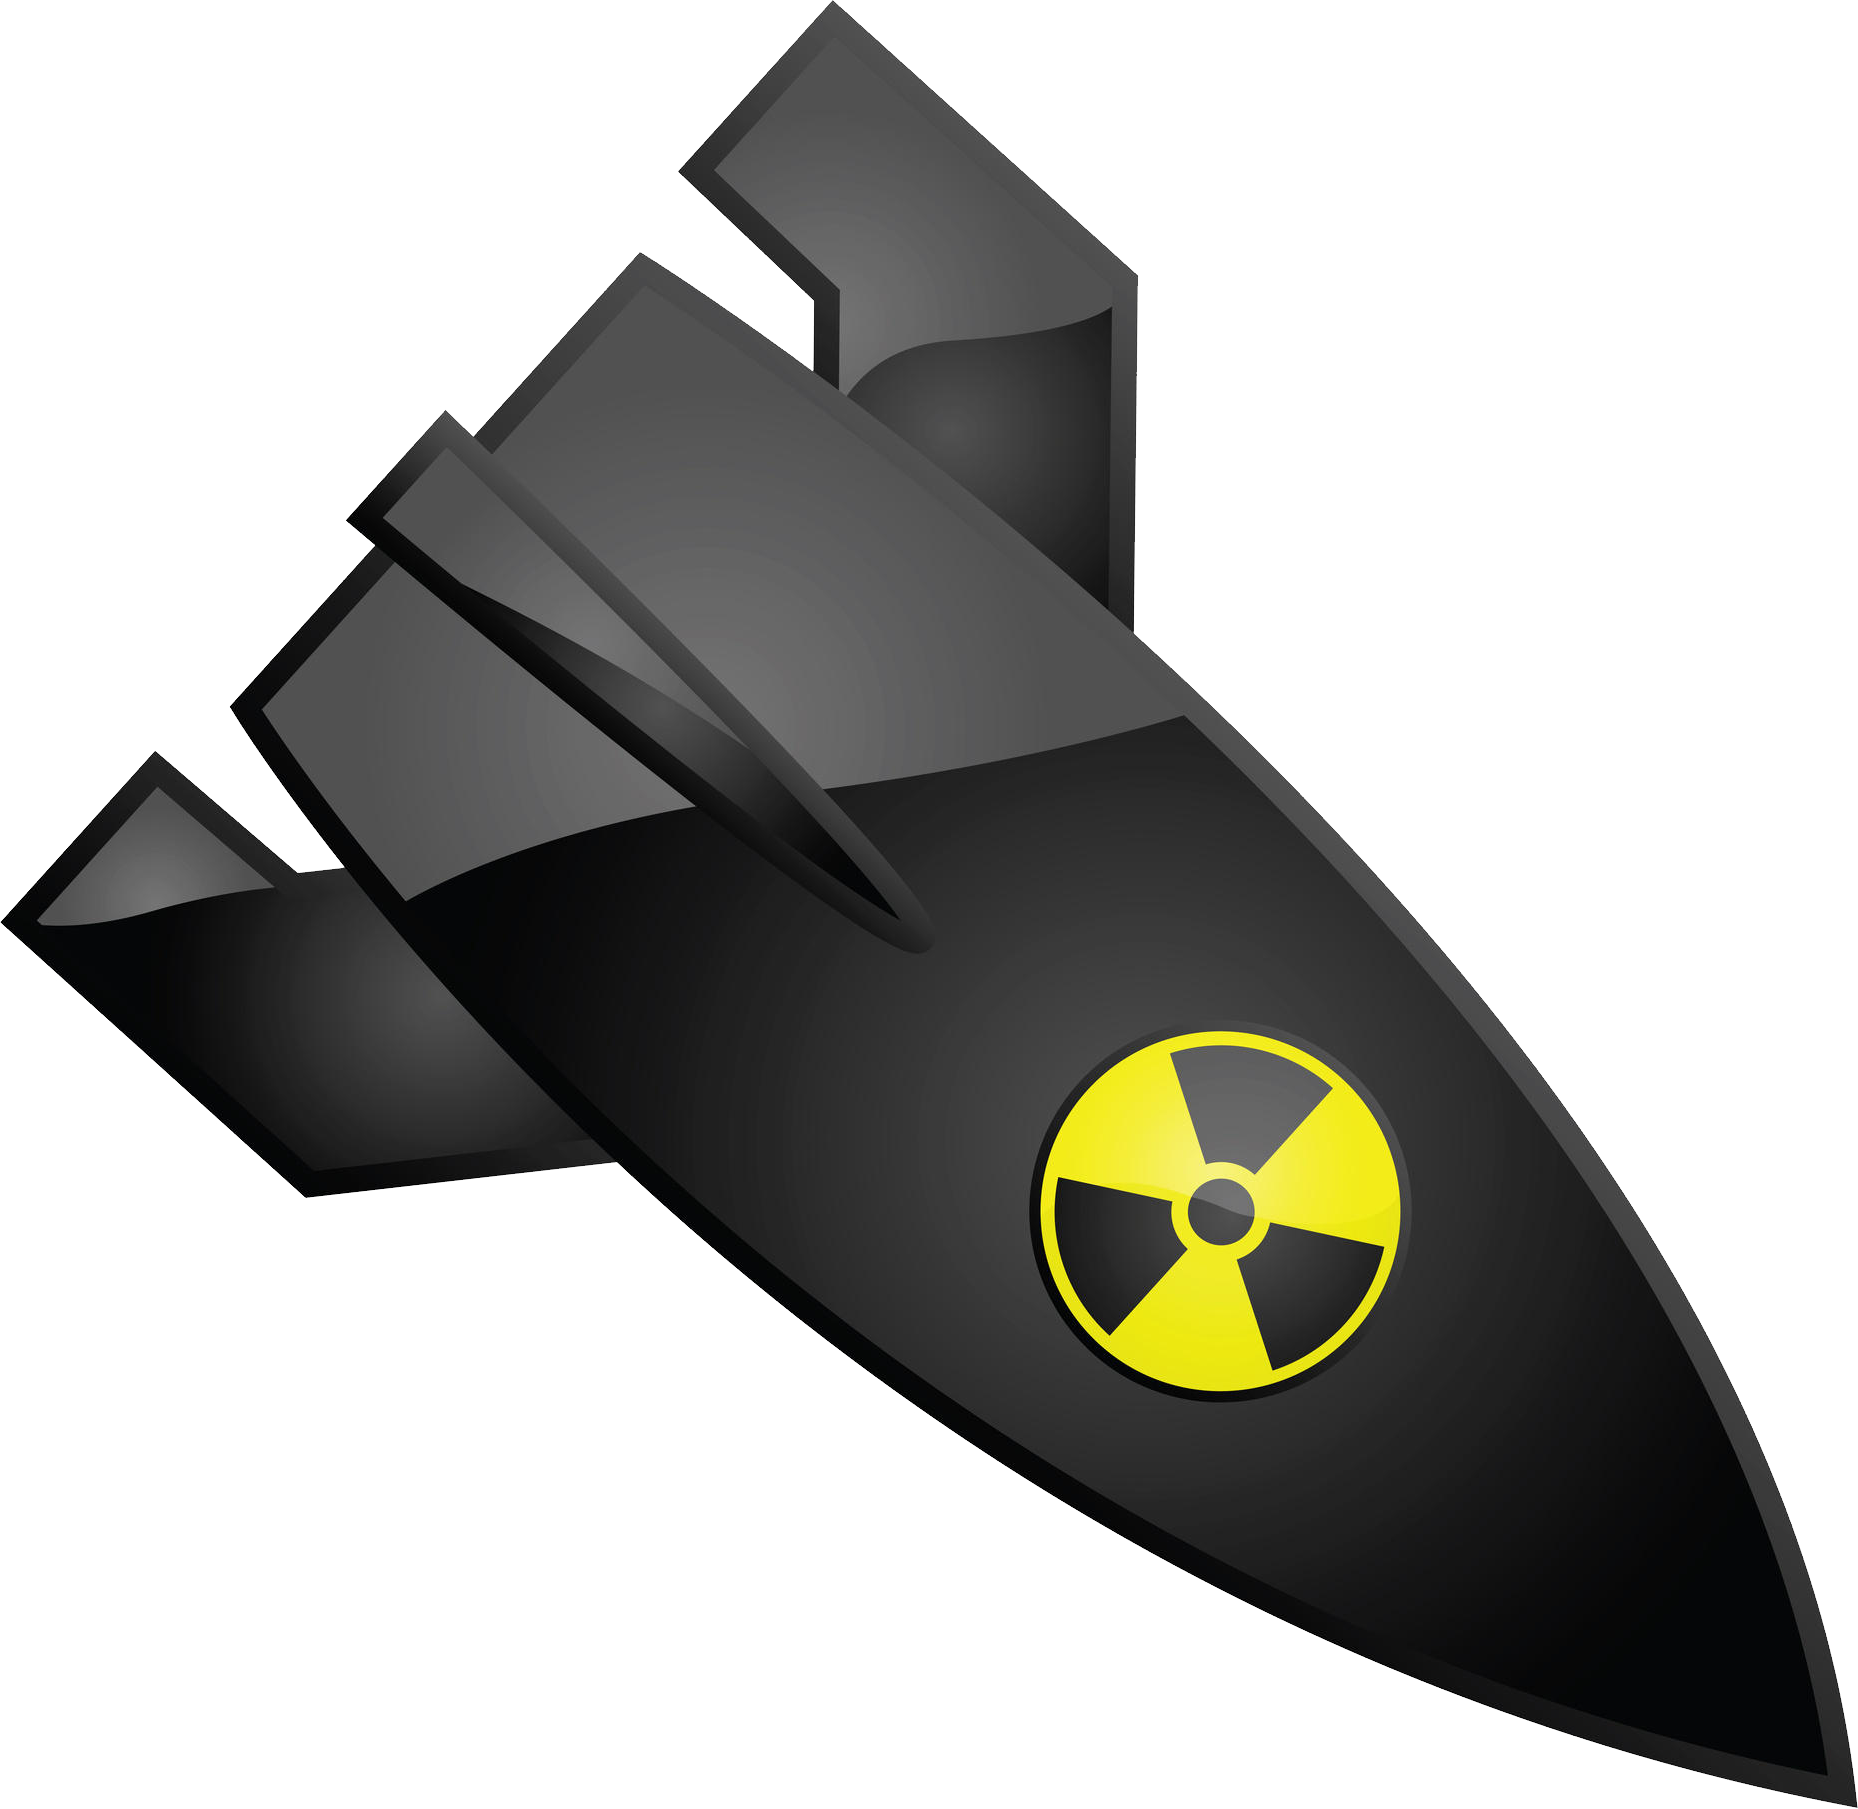 Nuclear bomb PNG, transparent png download